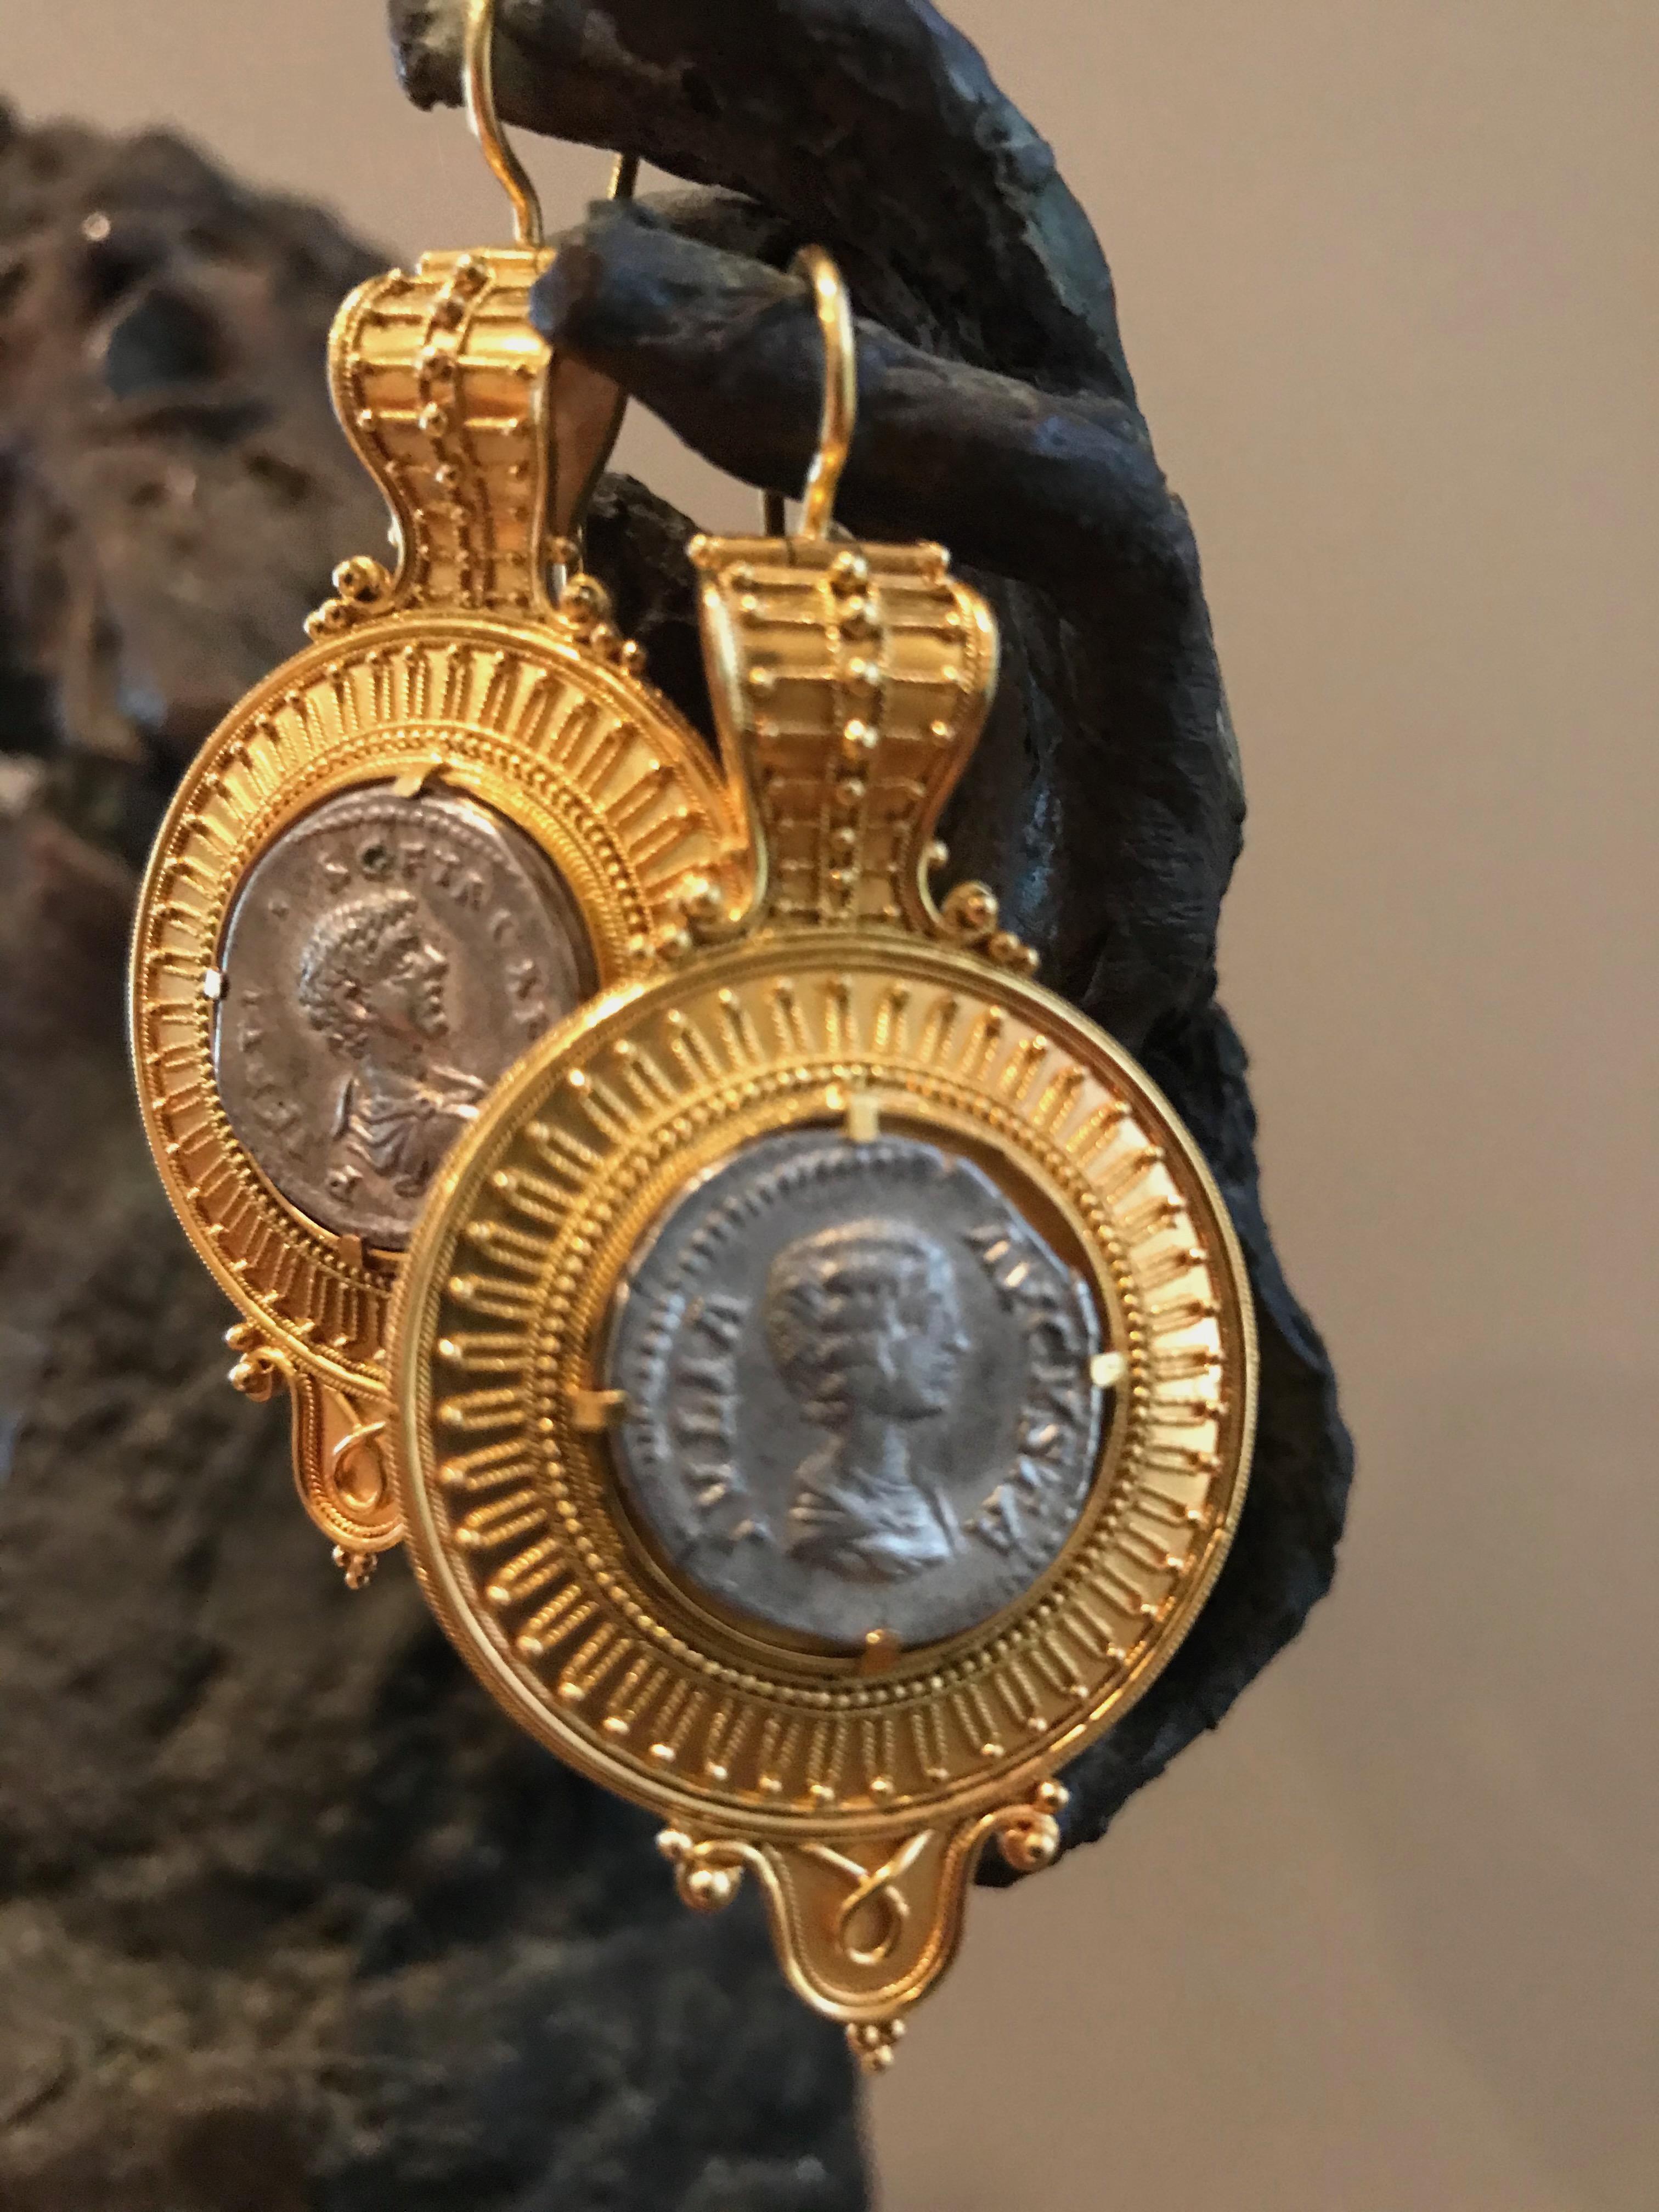 Castellani Ancient Silver Greek Coins circa 300BCE 15kt Gold Bulla Earrings  For Sale 5